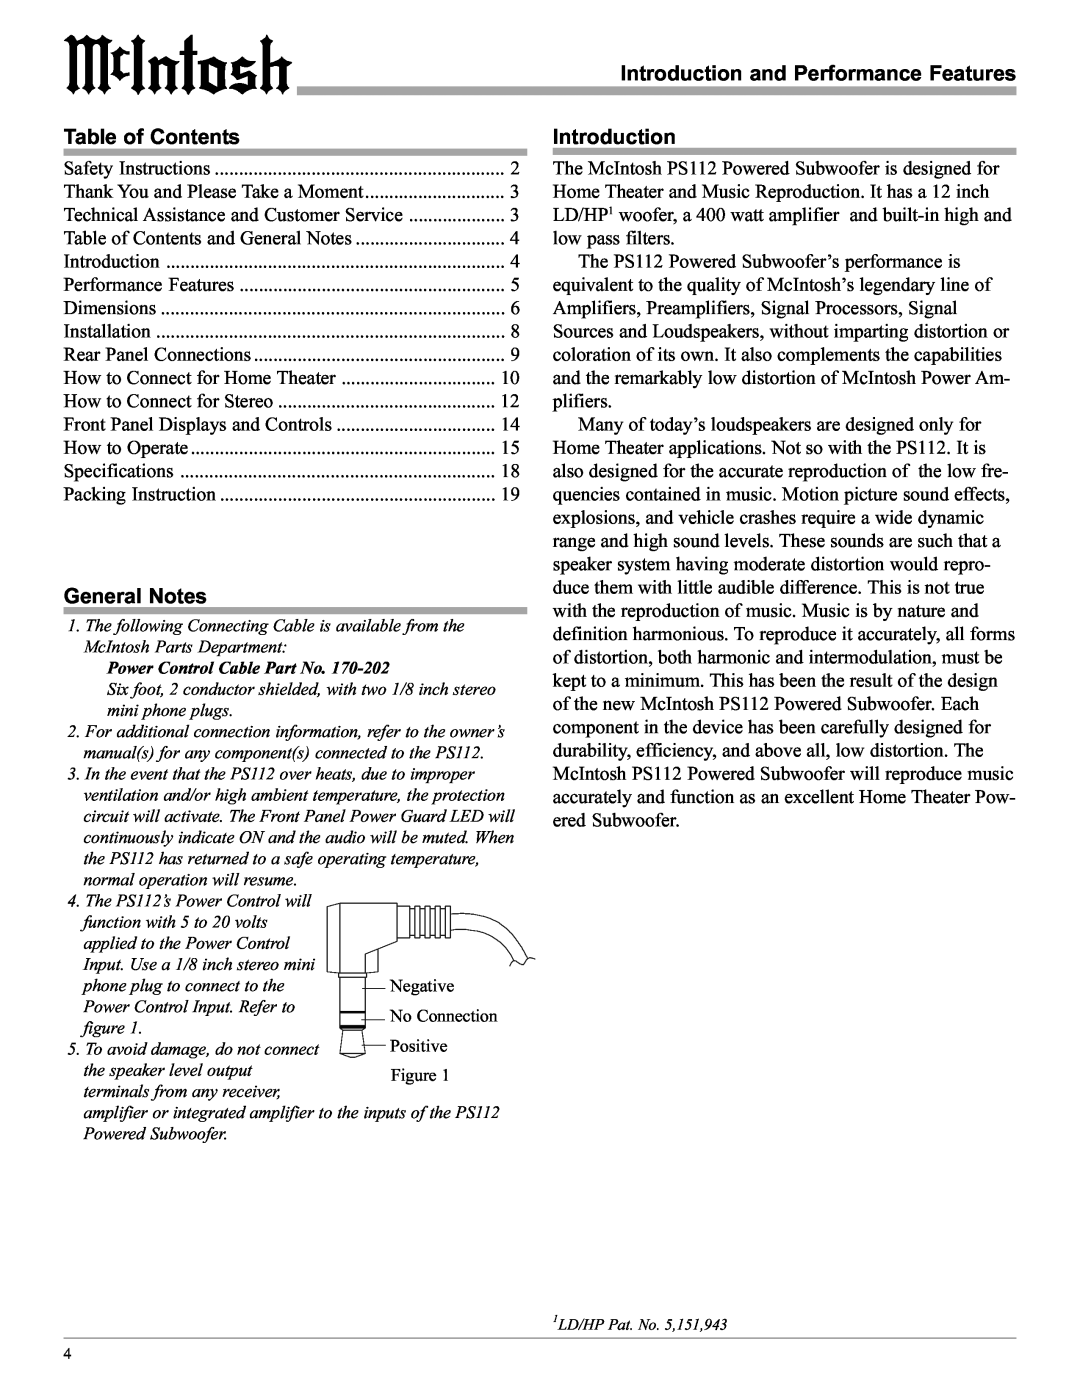 McIntosh PS112 manual Introduction and Performance Features, Table of Contents, General Notes 